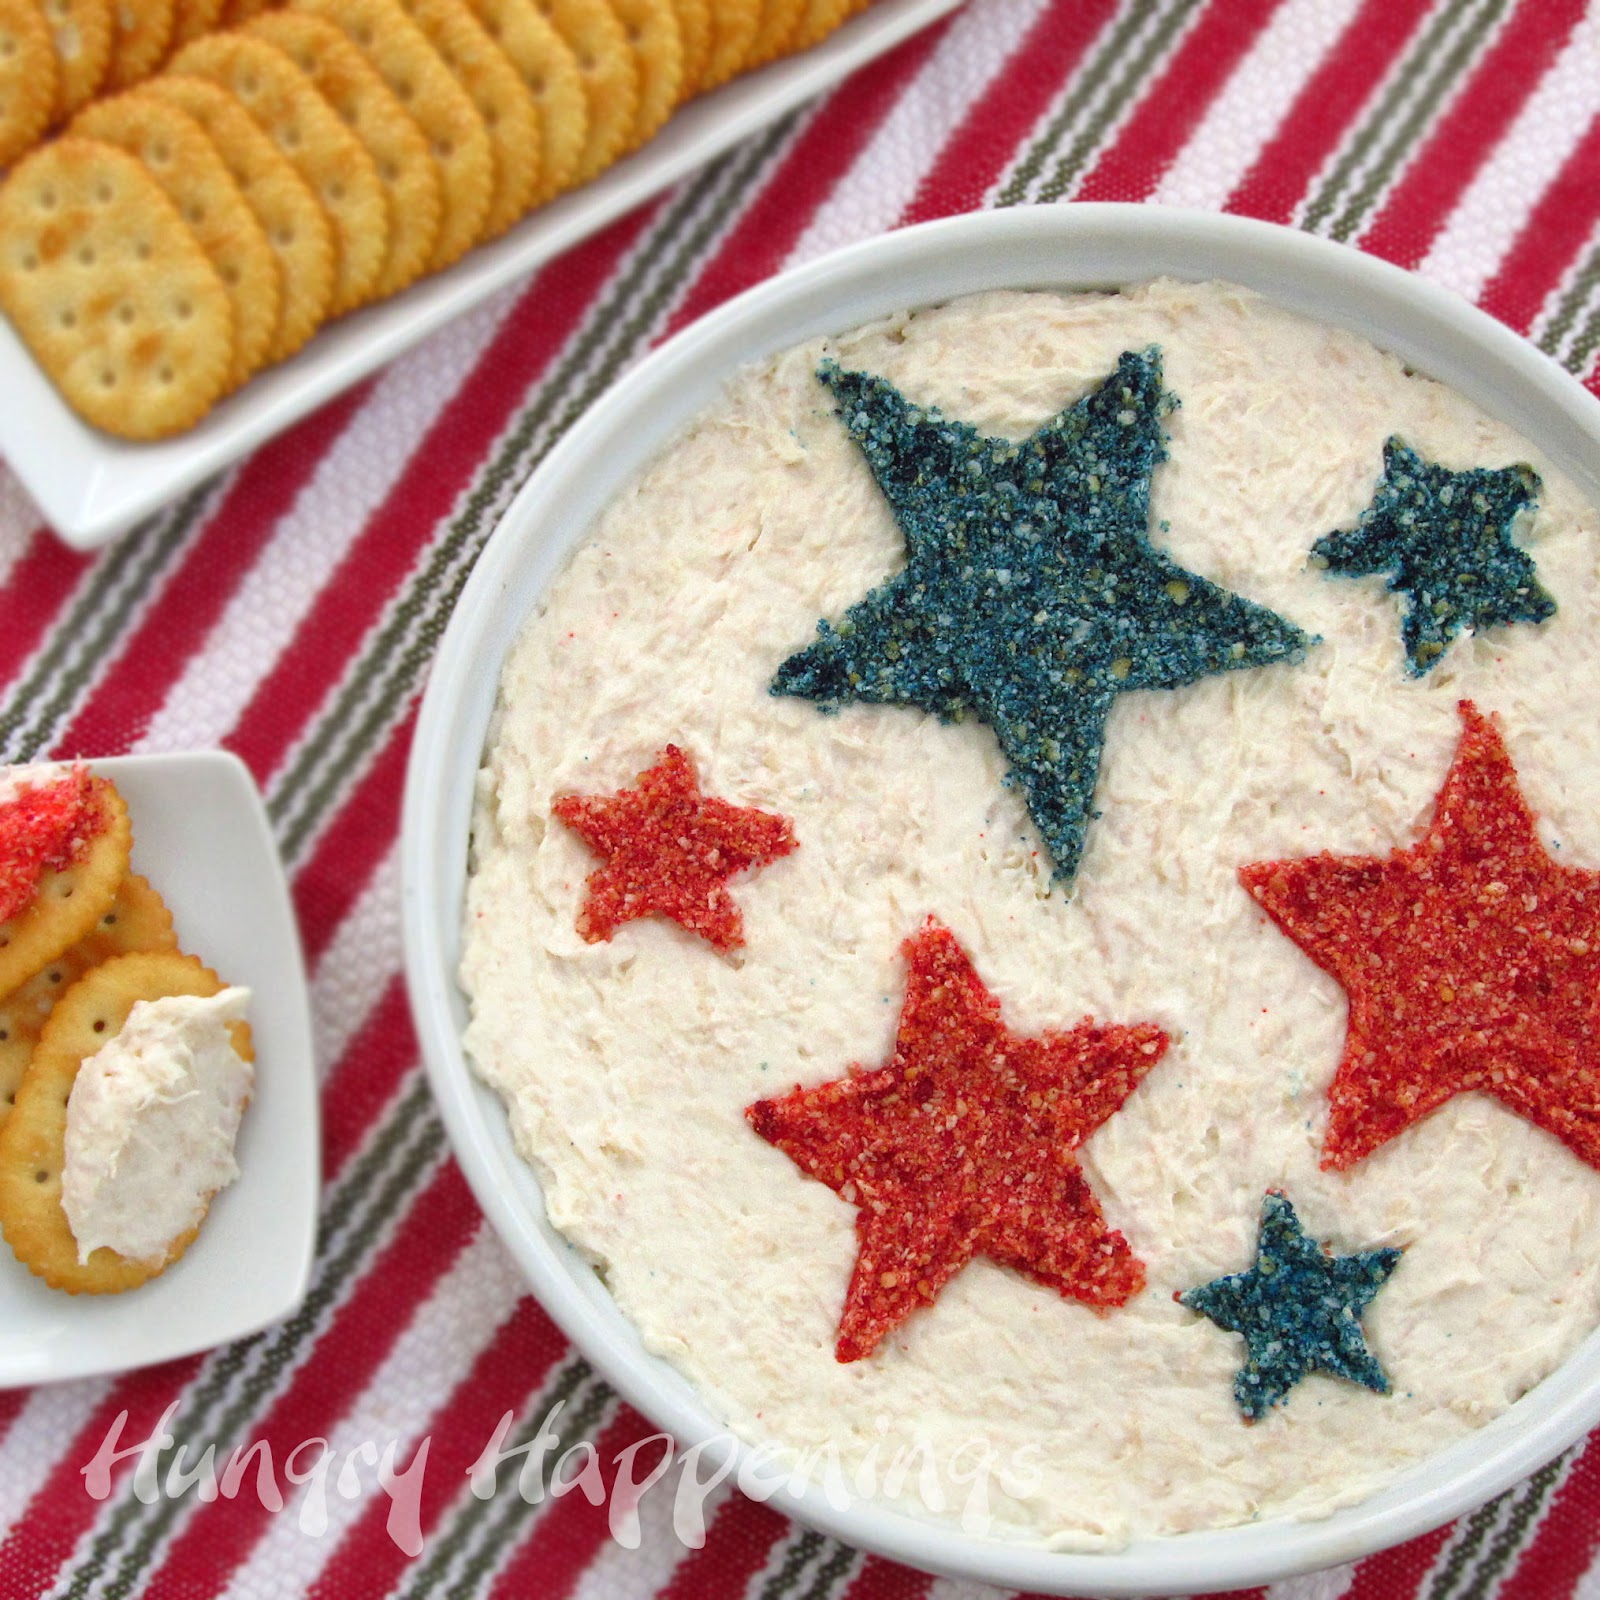 Hungry Happenings: How to turn a plain dip into a patriotic 